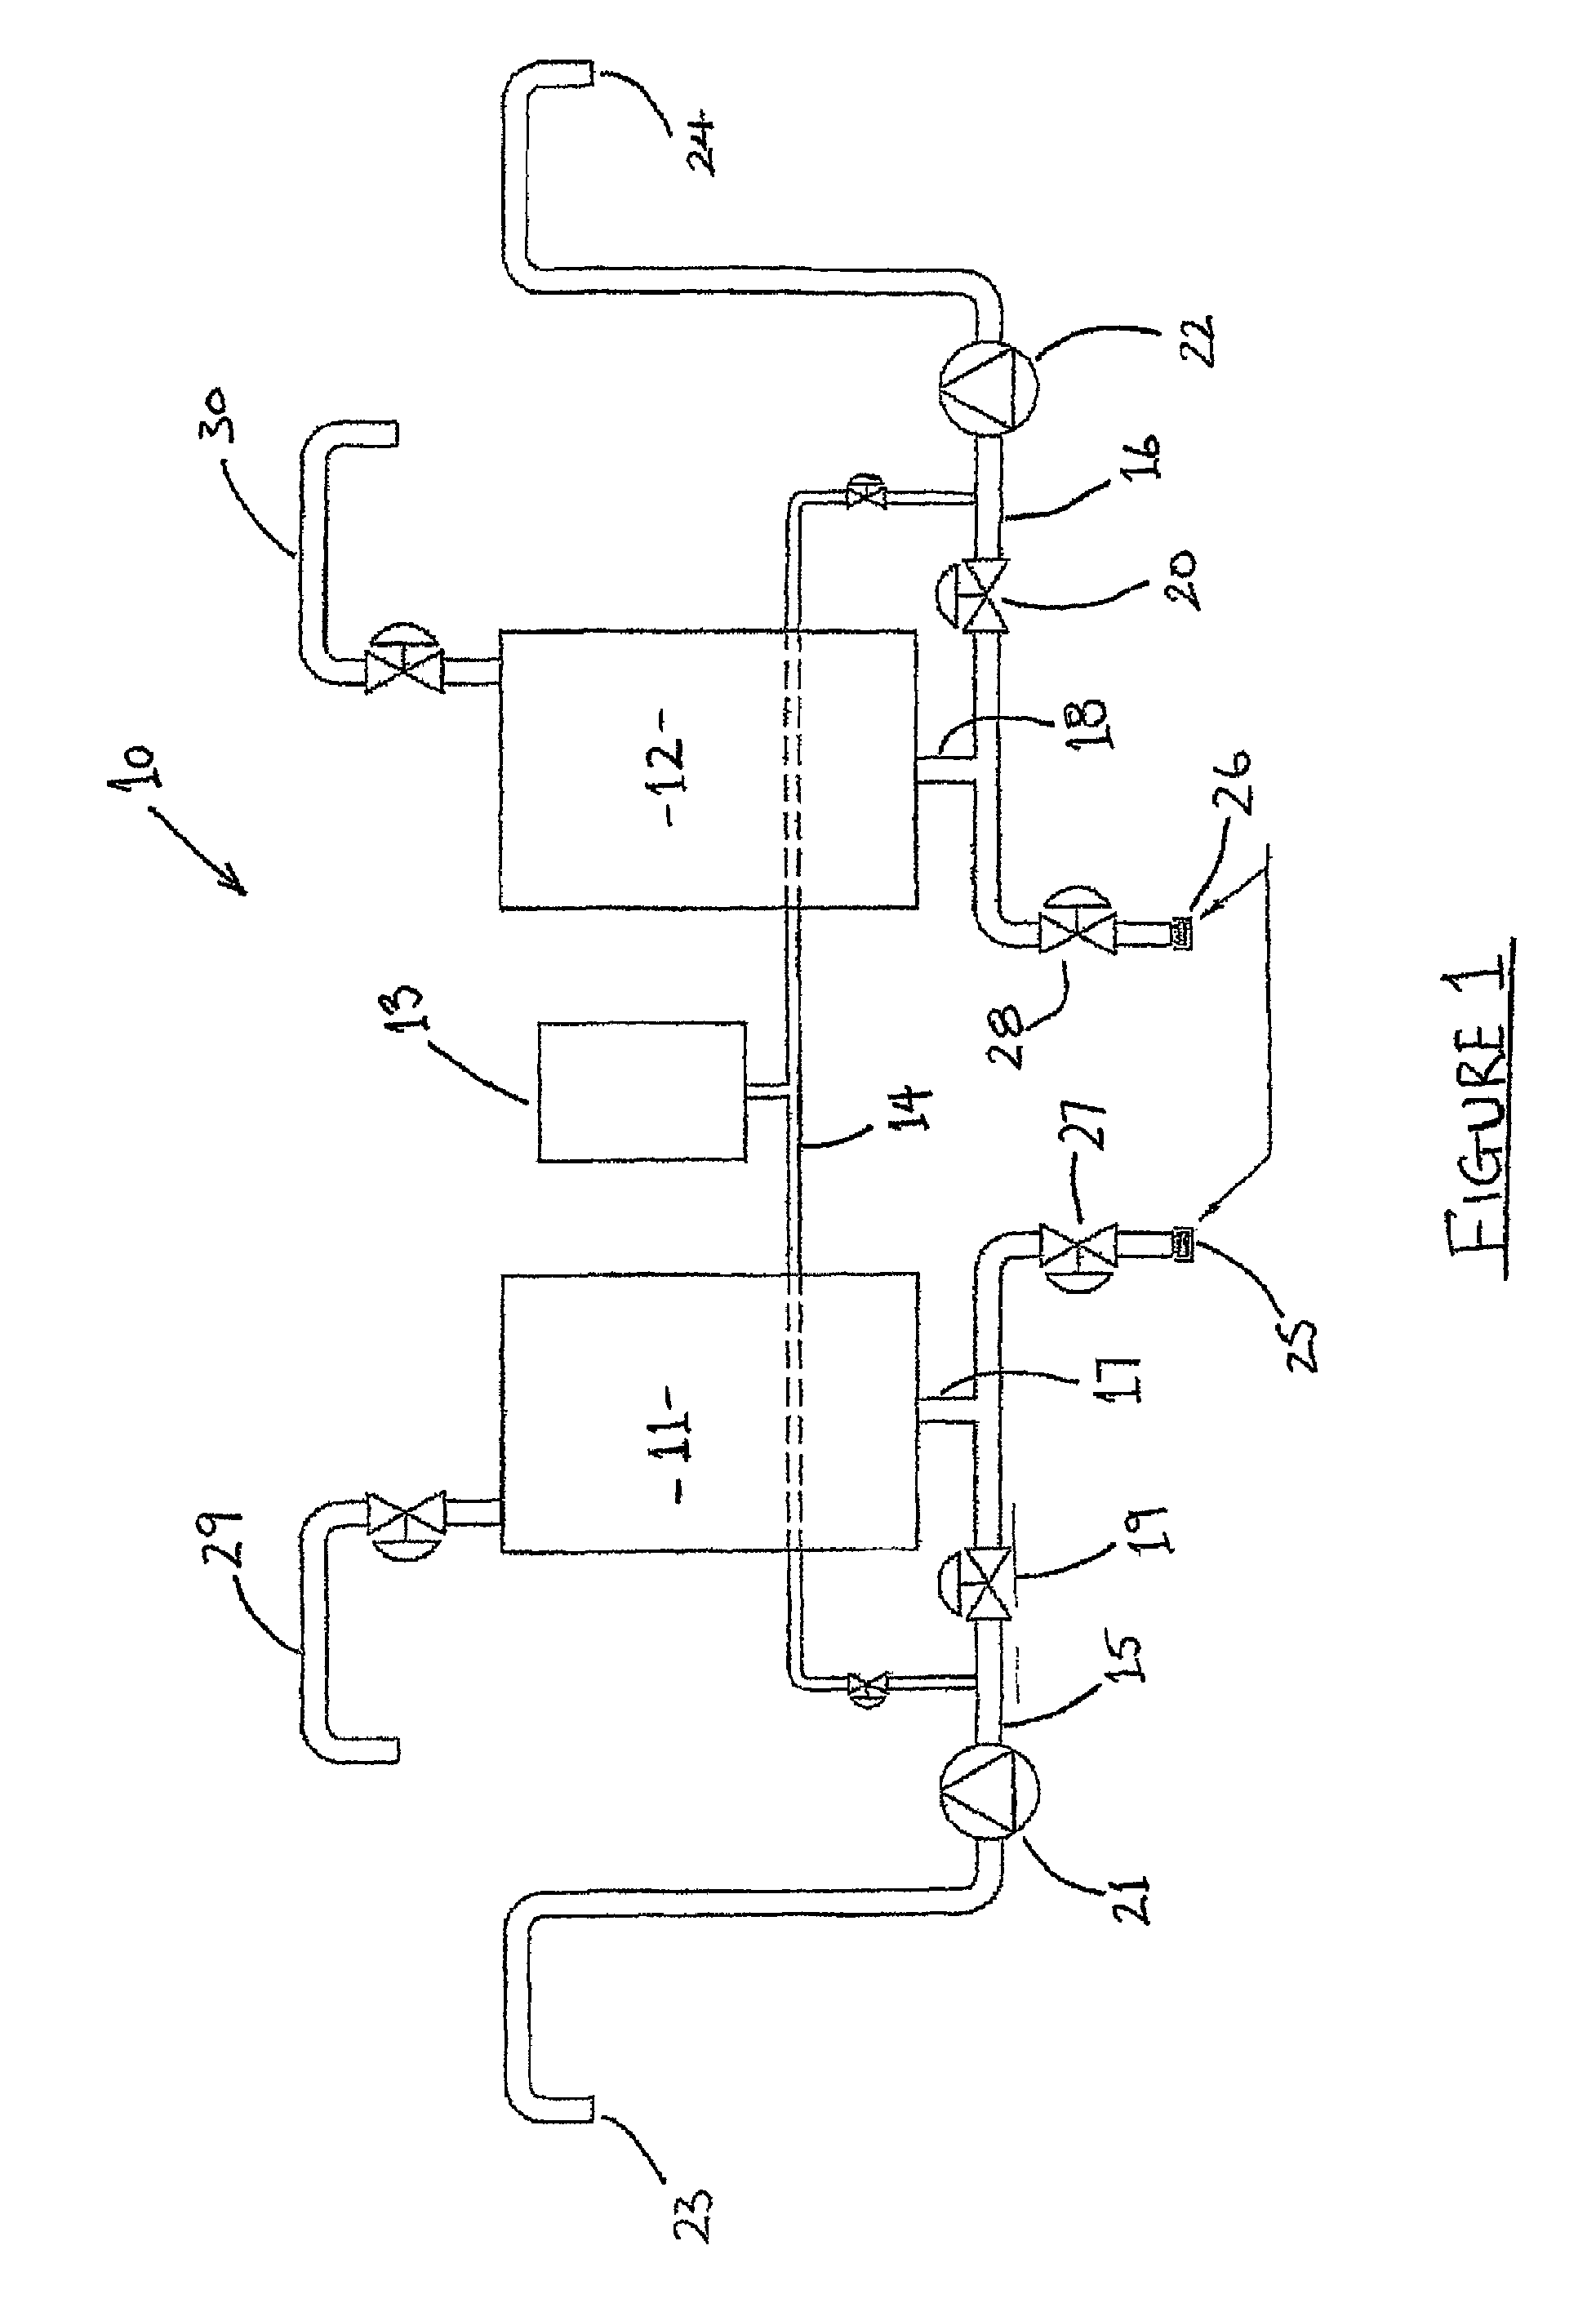 Dry mix cement composition, methods and systems involving same